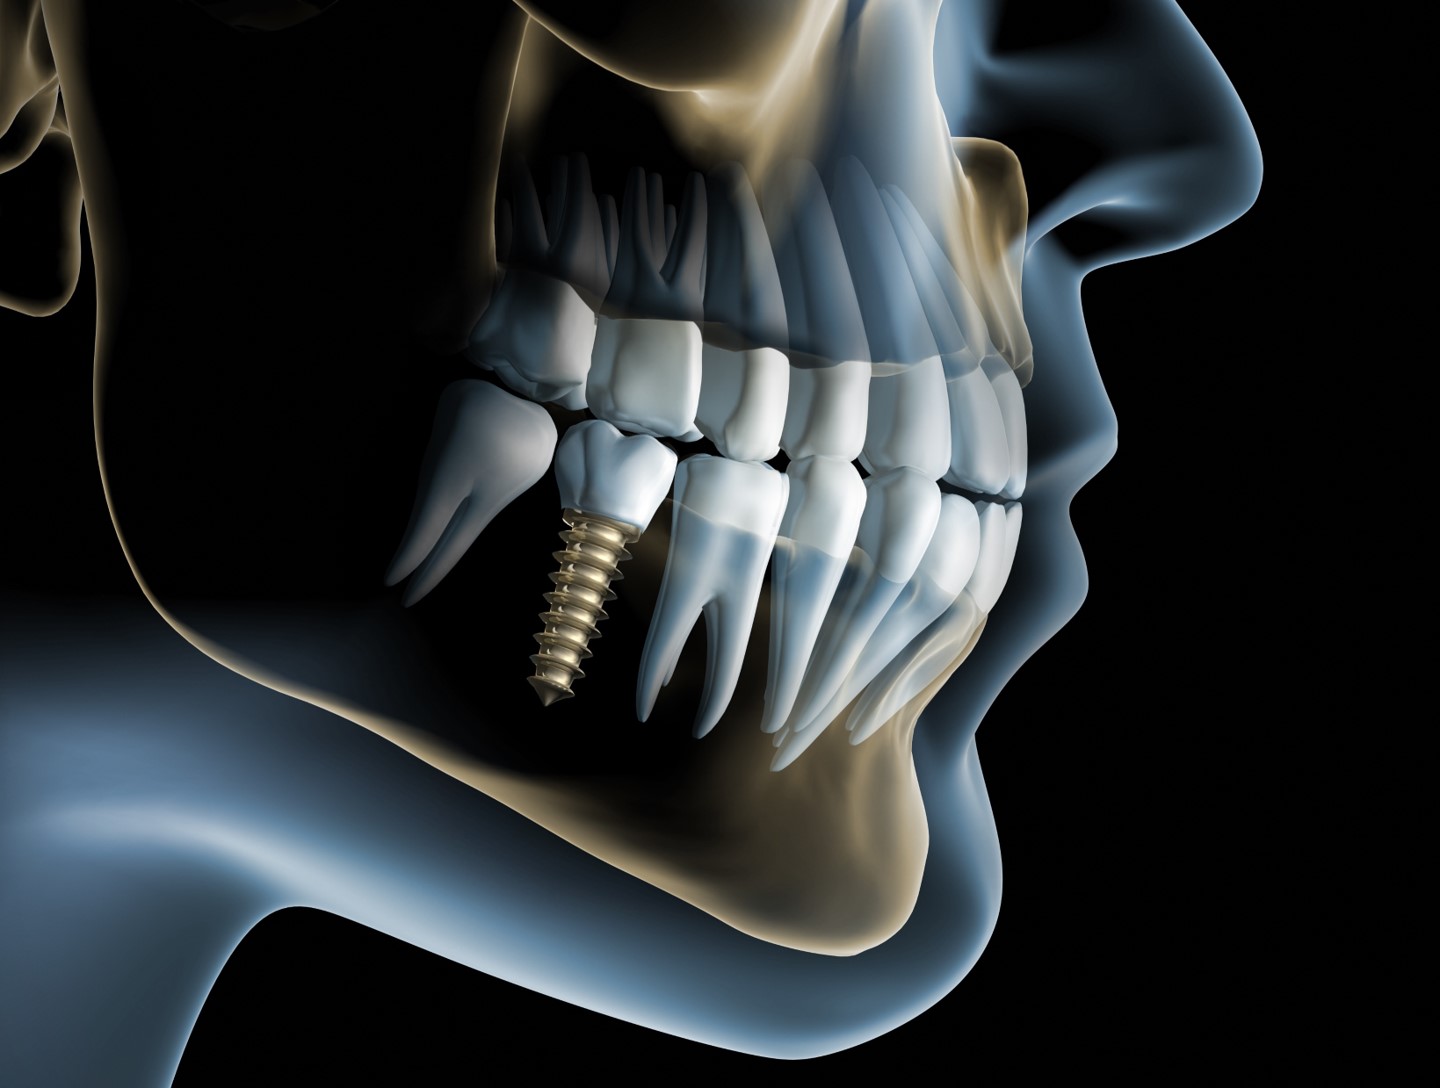 tooth implants to be measured with optical metrology